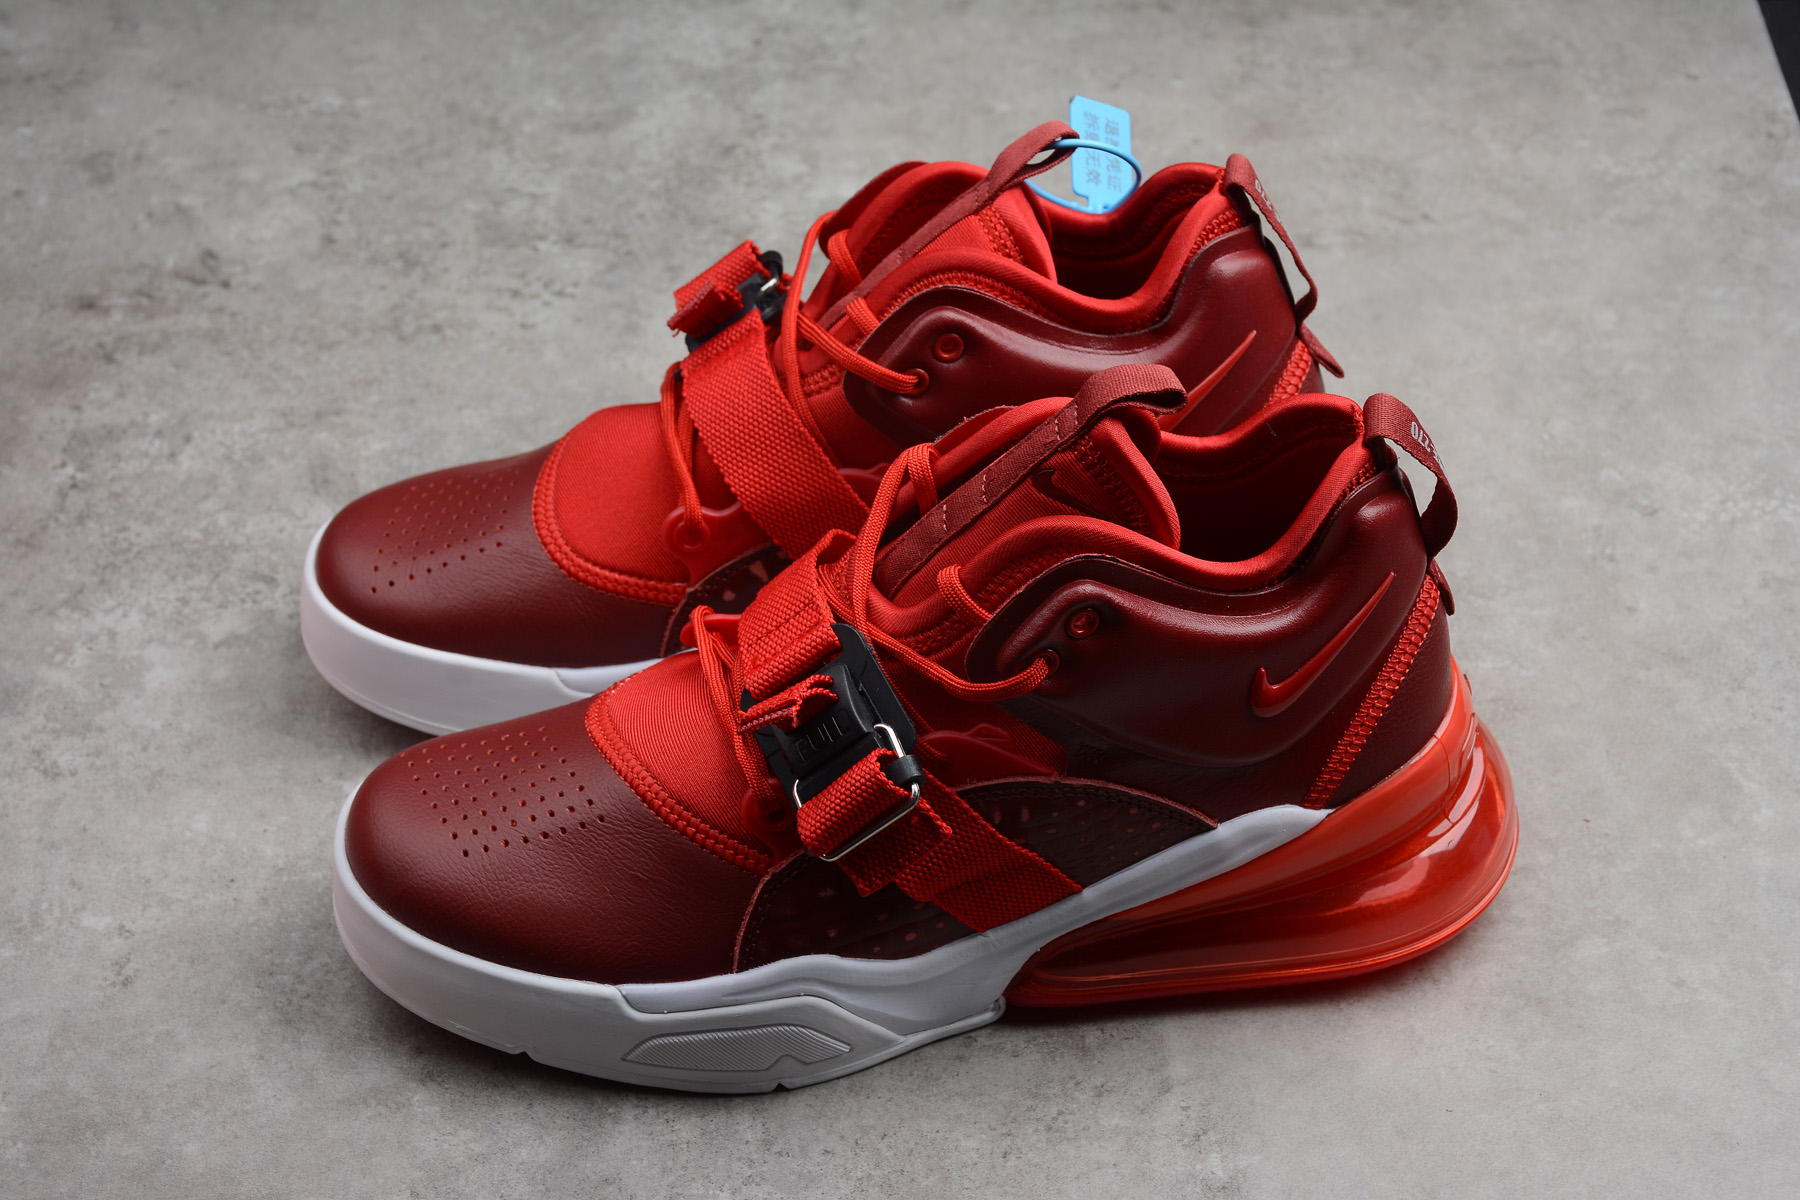 New Nike Air Force 270 “red Croc” Team Redgym Redwhite Ah6772 600